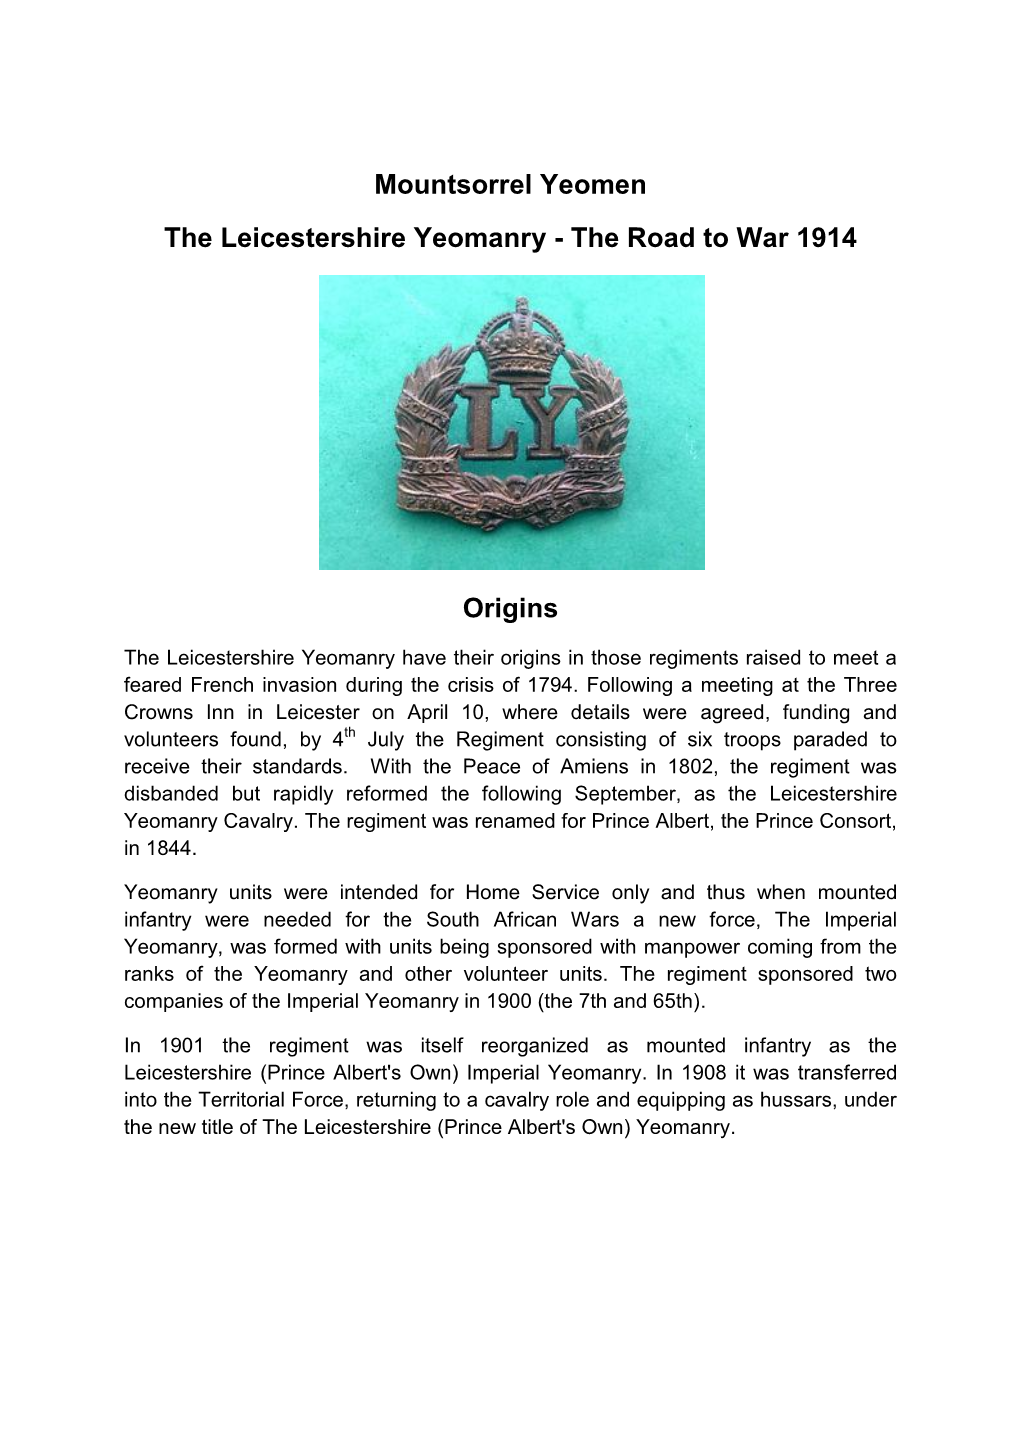 Mountsorrel Yeomen the Leicestershire Yeomanry - the Road to War 1914